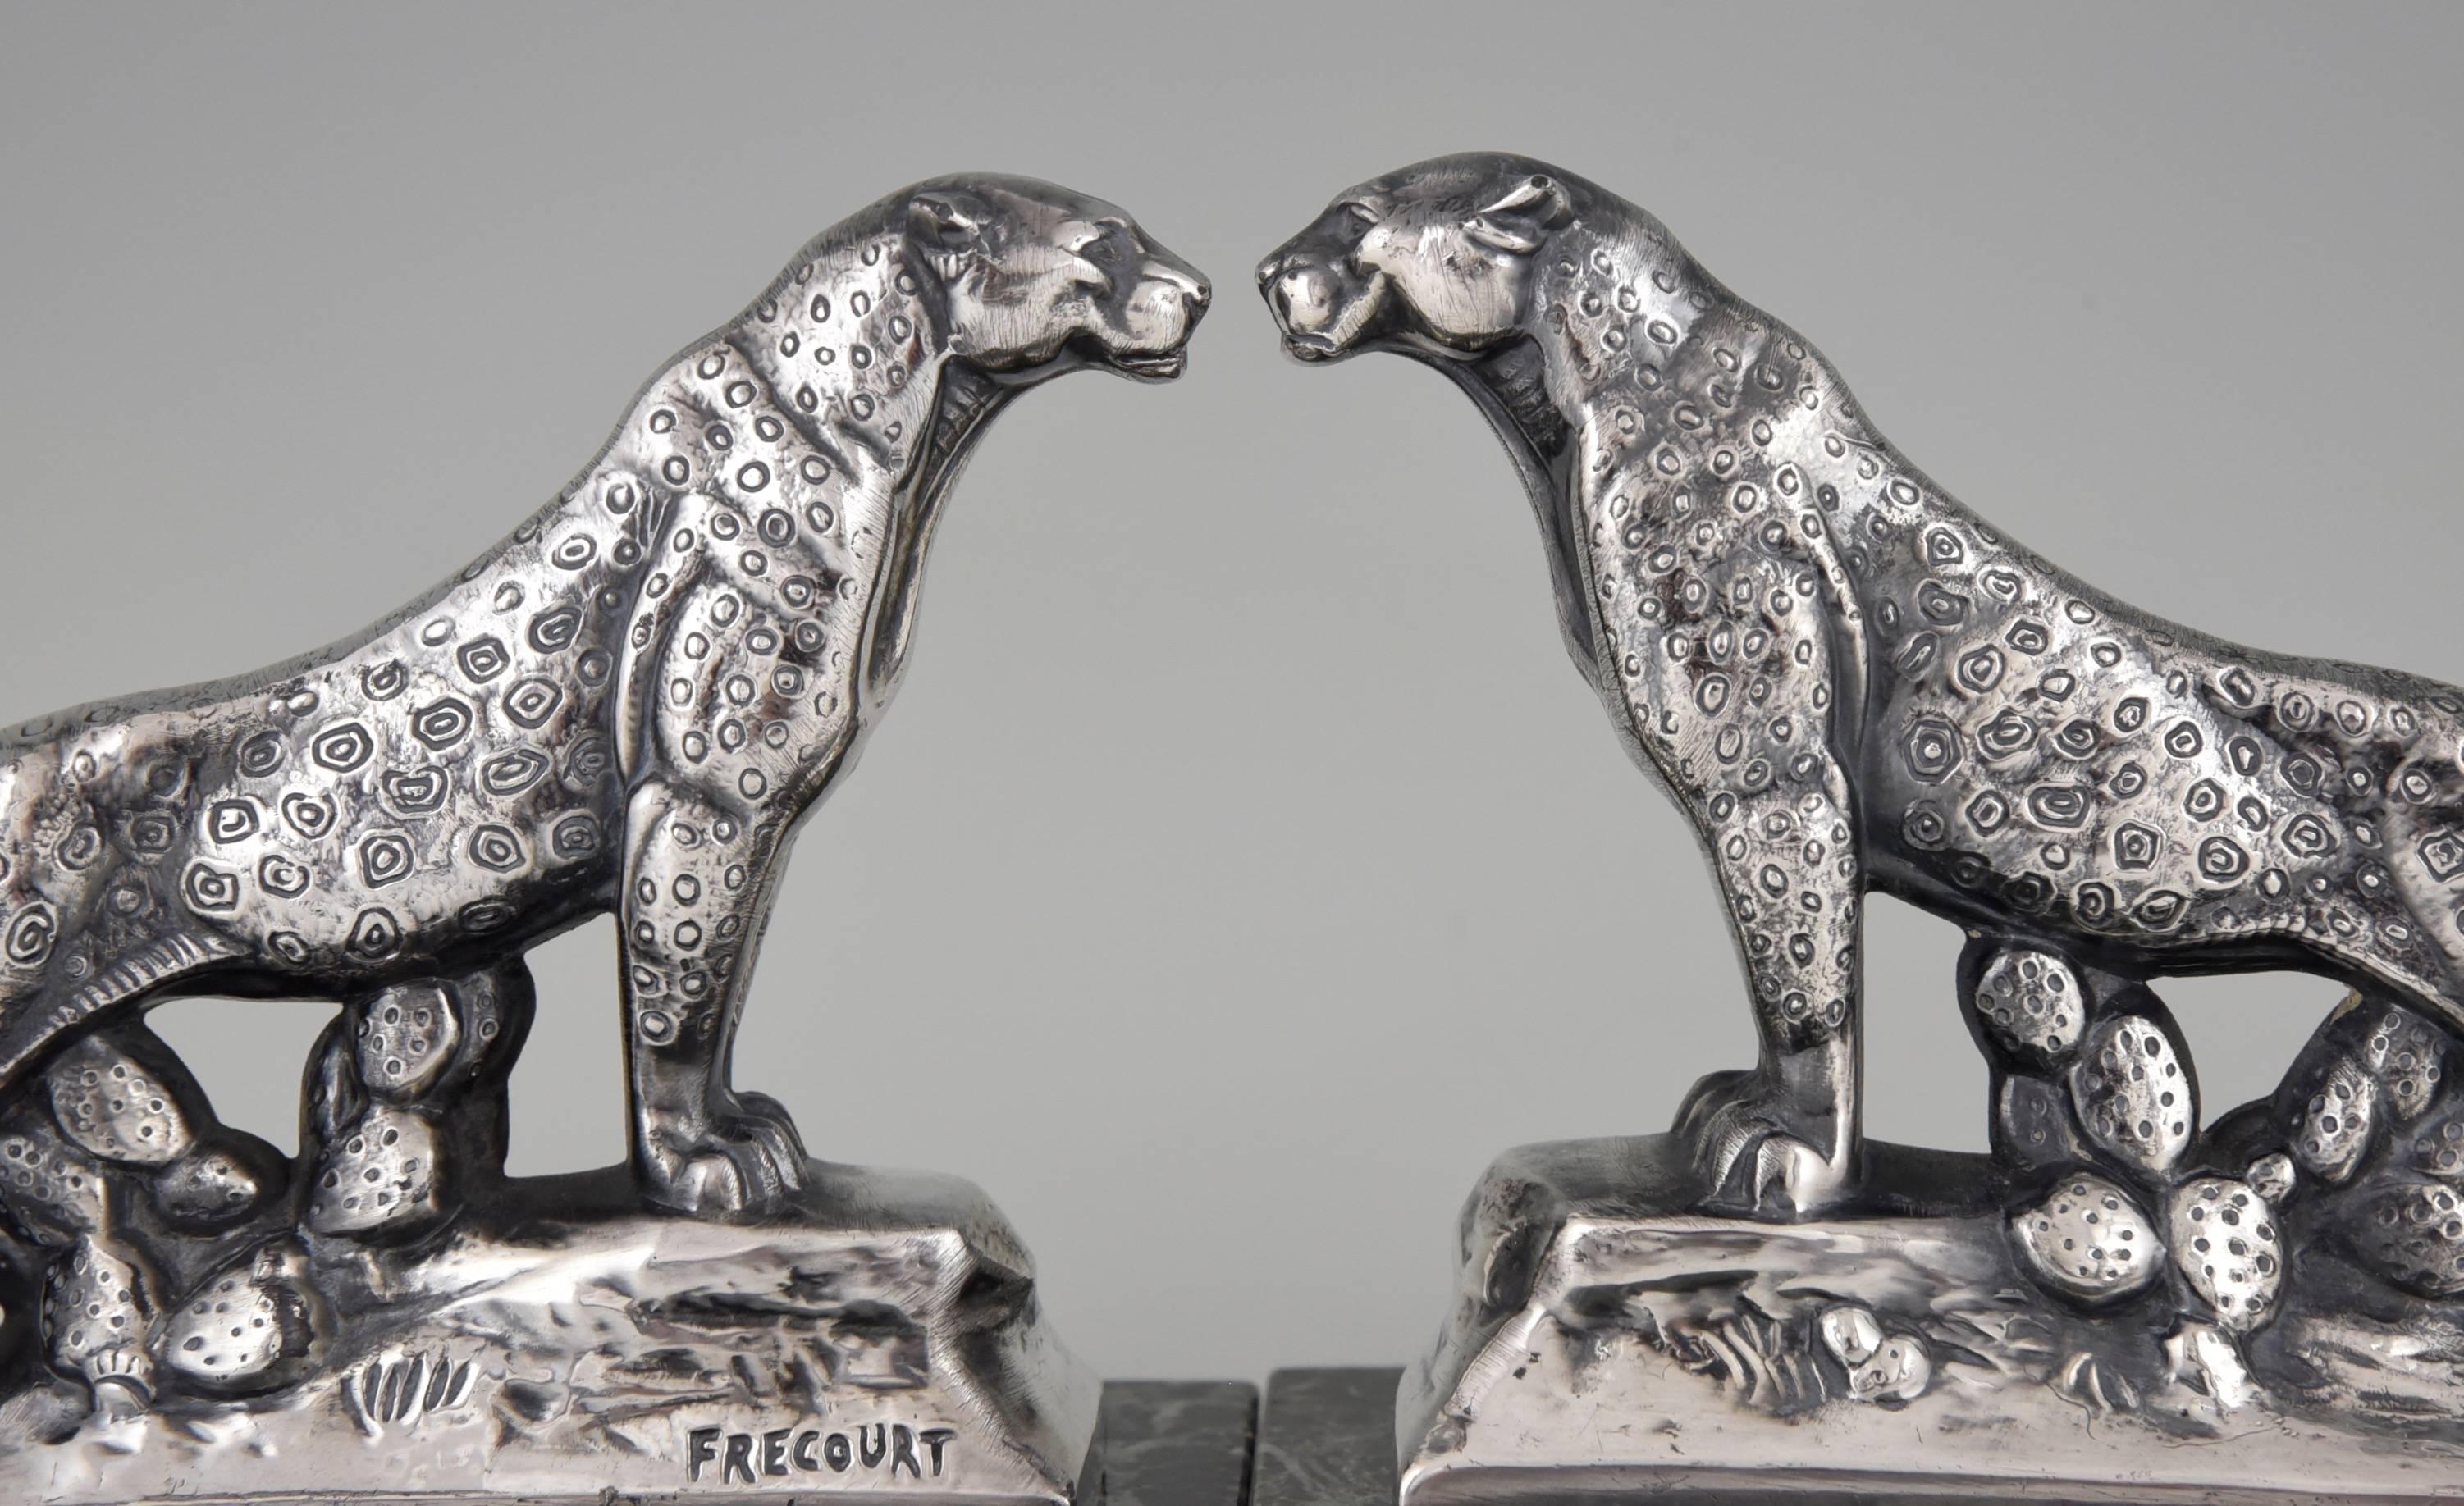 Mid-20th Century French Art Deco Panther Bookends by Frecourt, 1930